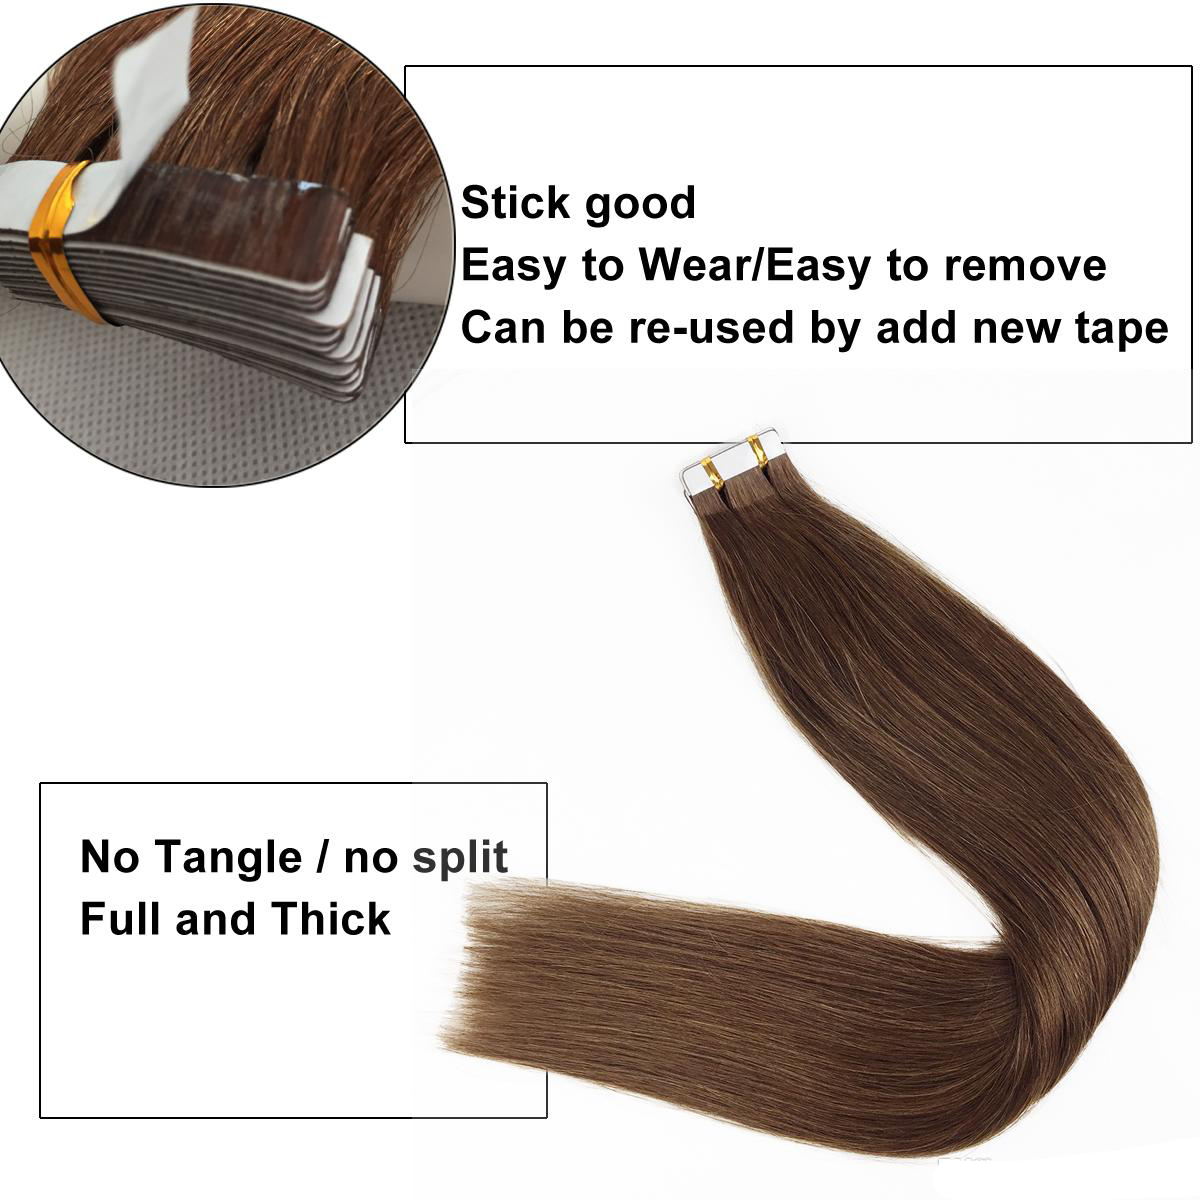 Quality Seamless Human Hair Extensions - Brazilian Remy Skin Hair Extensions Quality Seamless Human Hair Extensions - Brazilian Remy Skin Hair Extensions